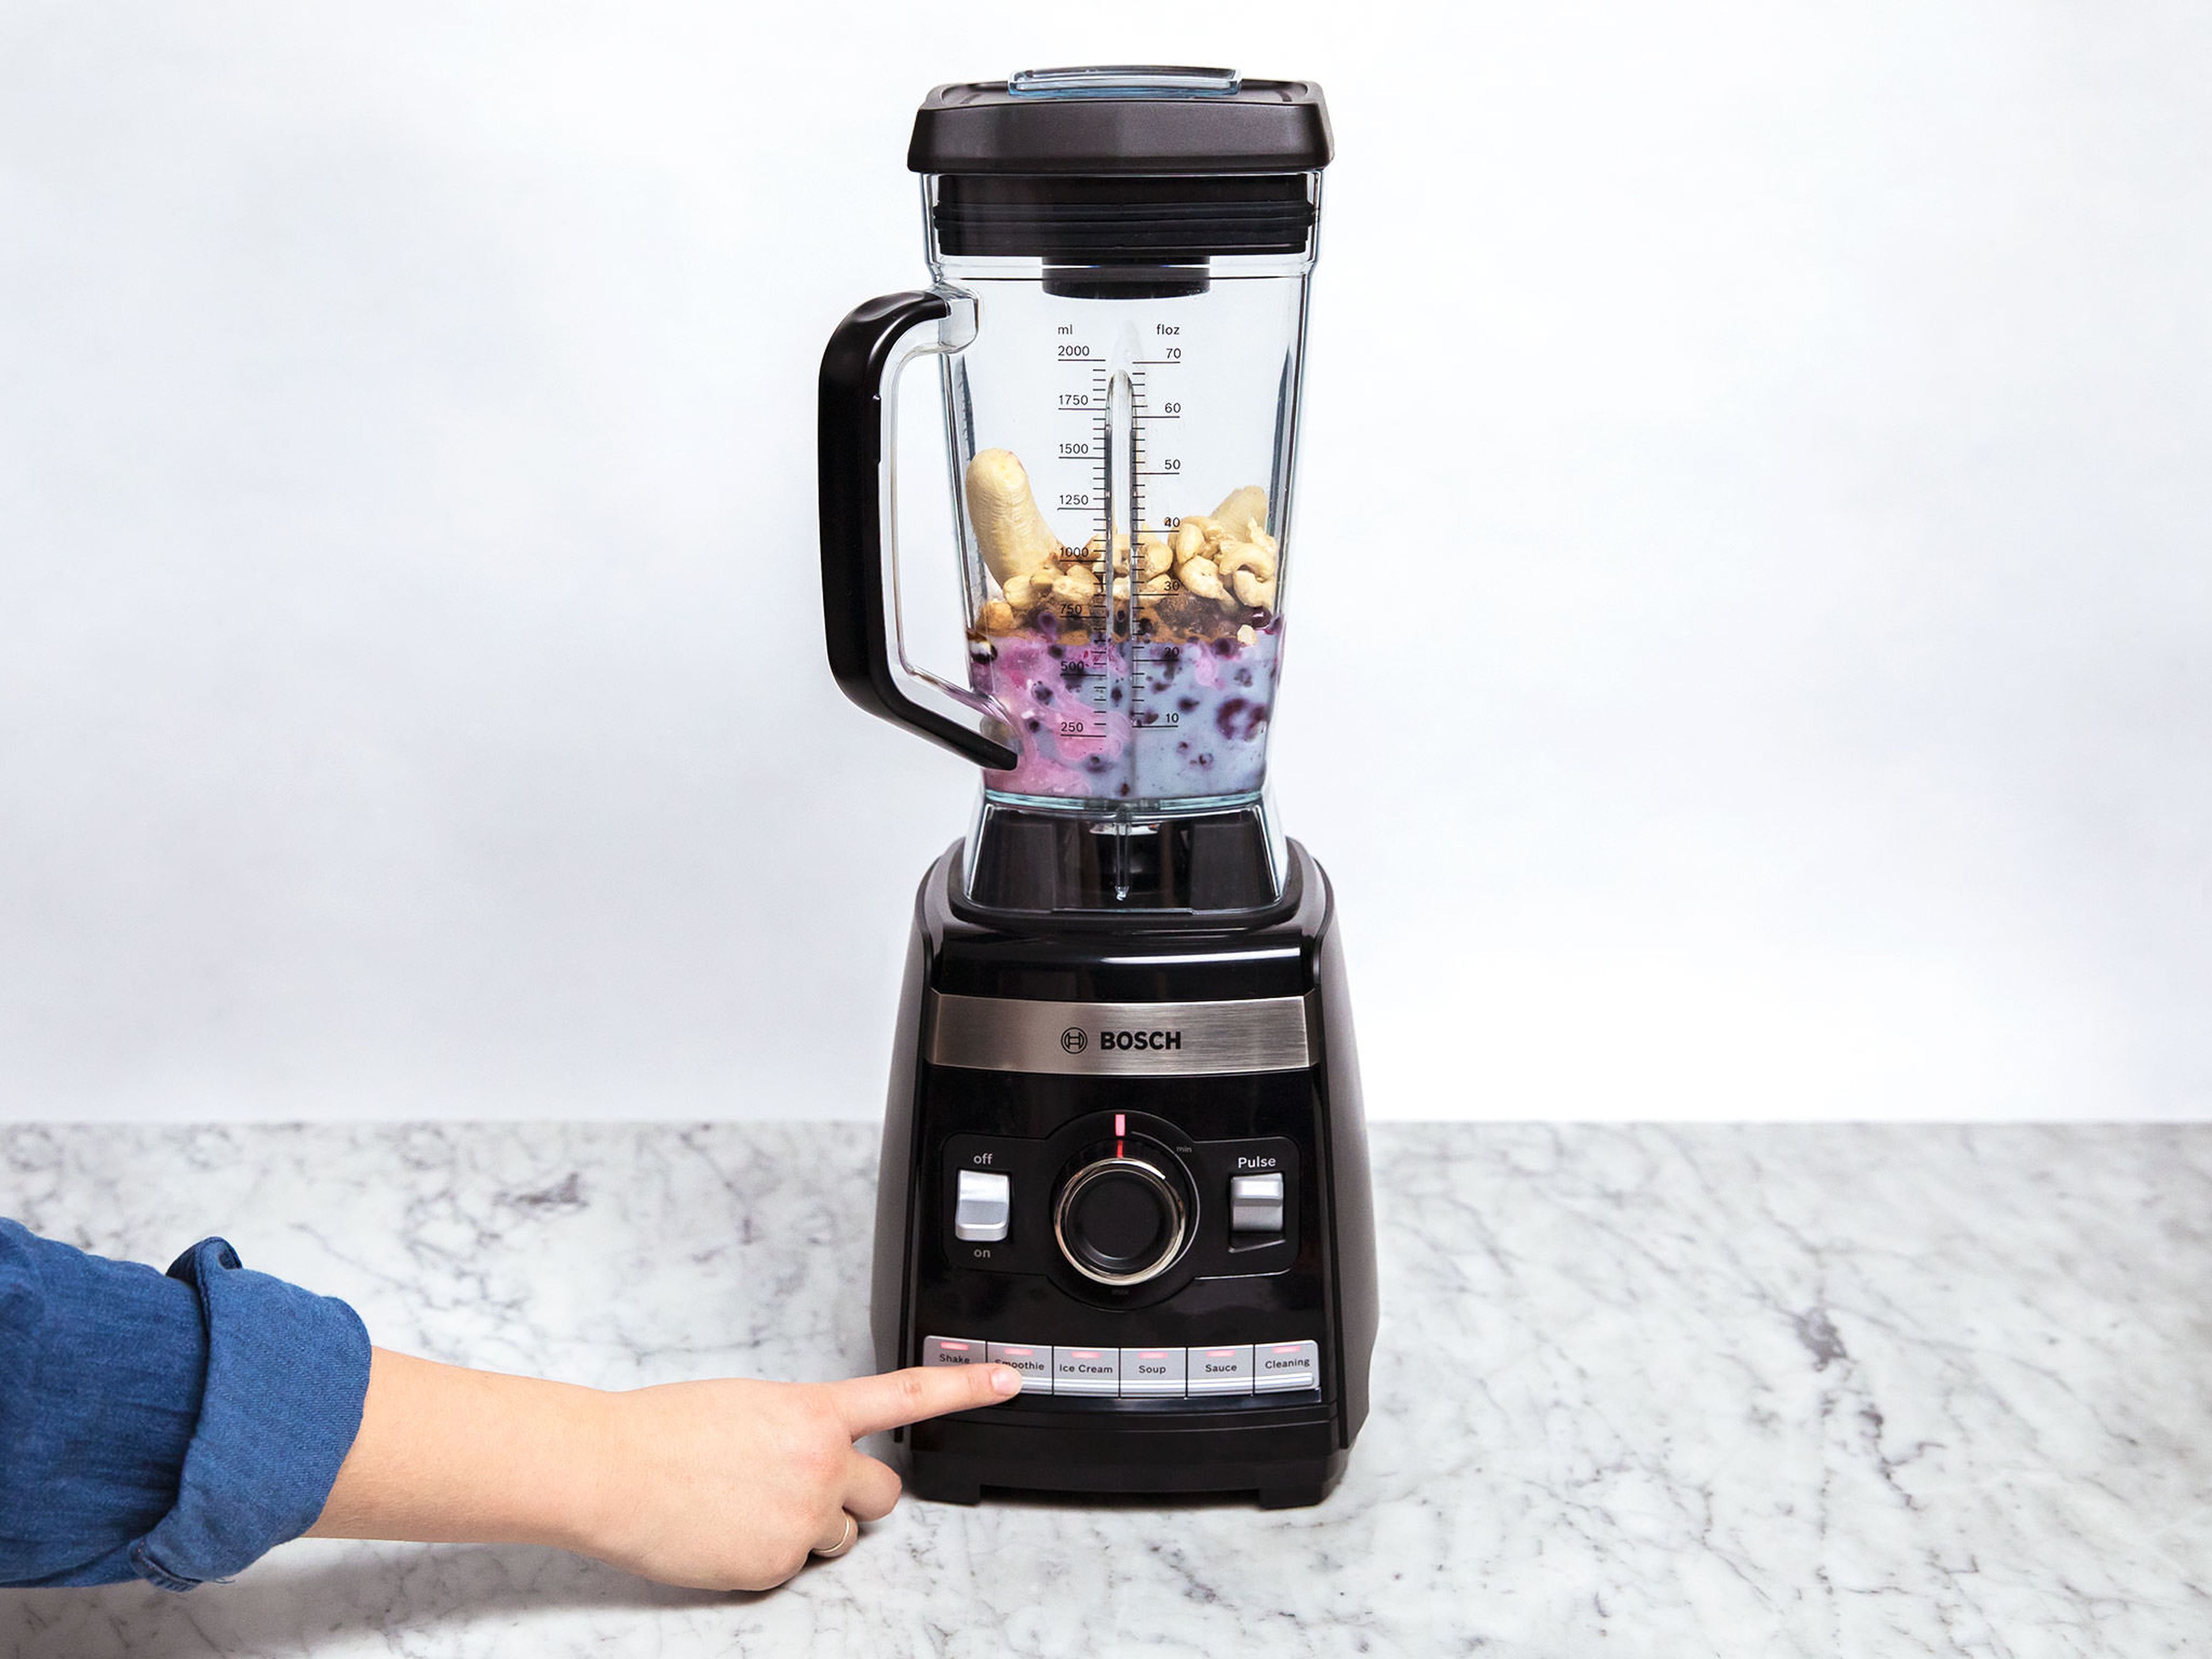 Add frozen blueberries, soy milk, soy yogurt, honey, freshly squeezed lemon juice, cinnamon, and cashews and blend until smooth (using your blender's smoothie function). Enjoy!